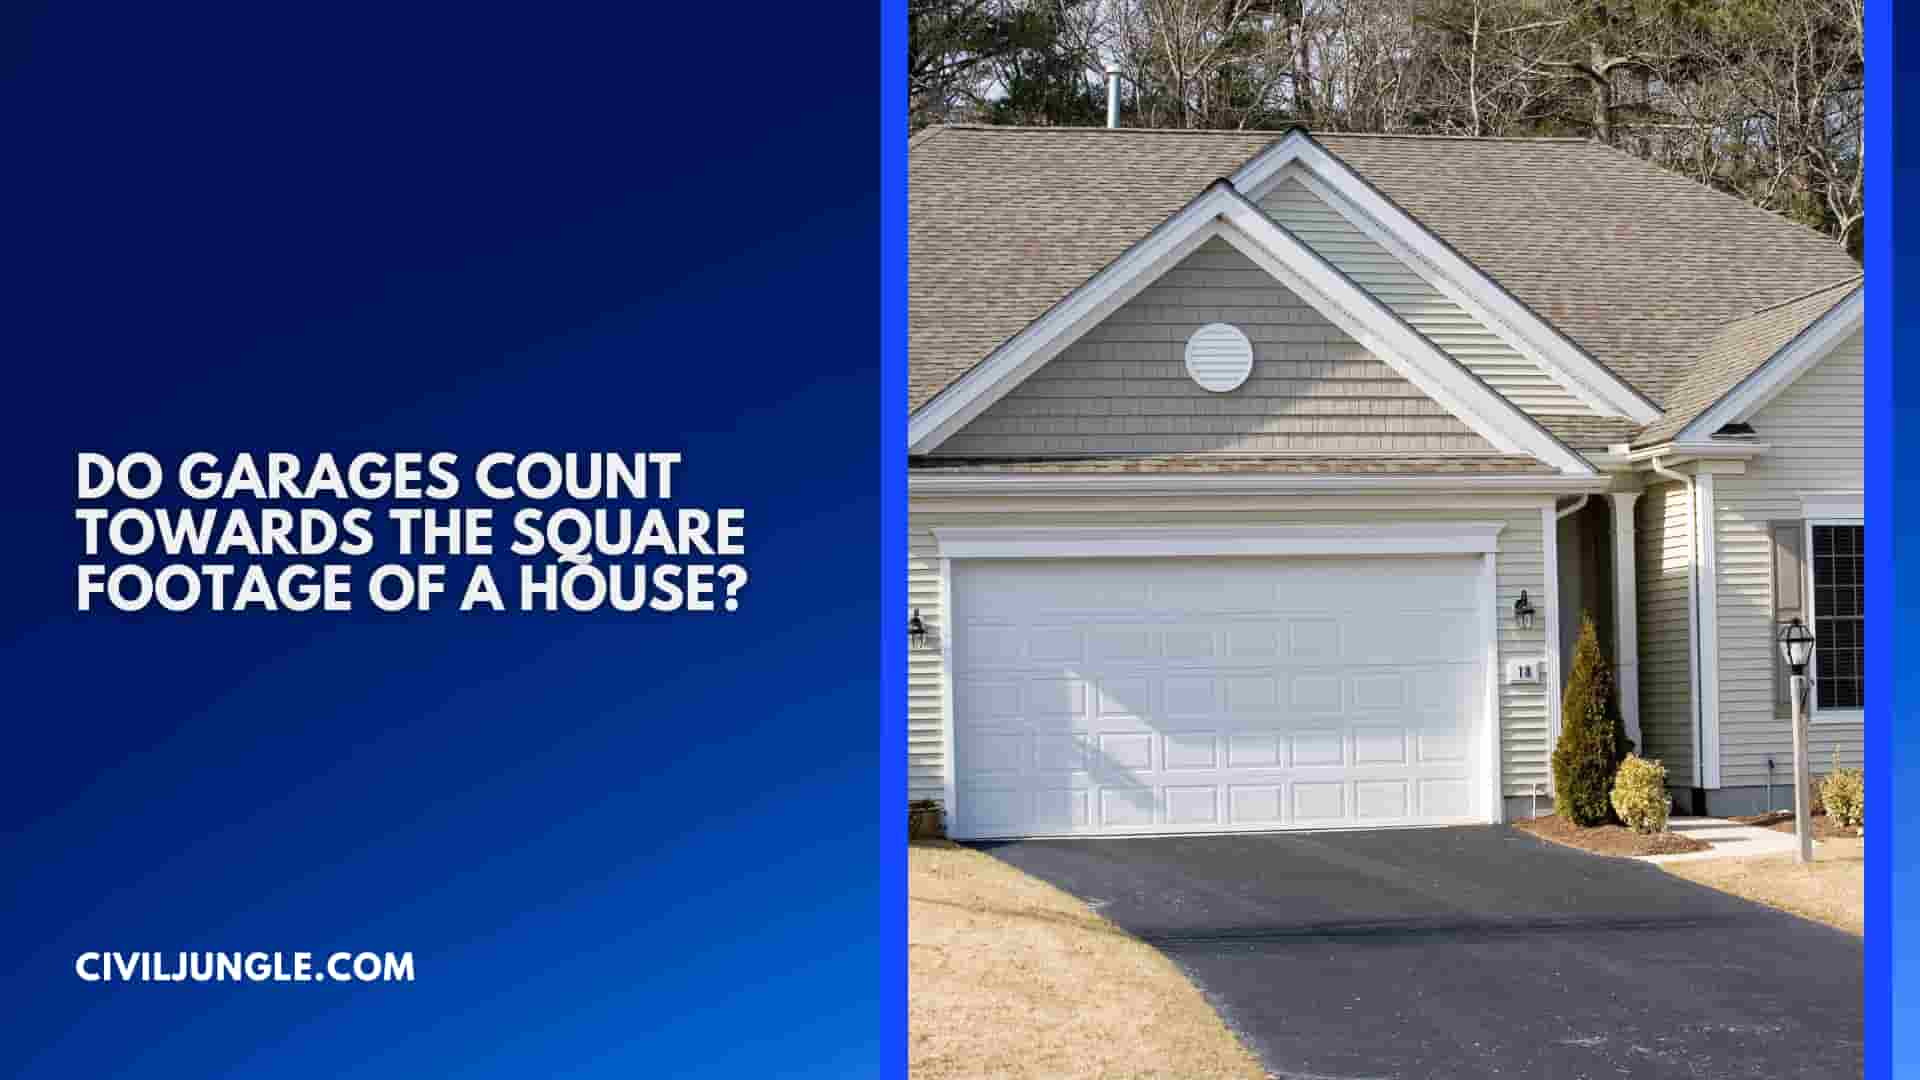 Do Garages Count Towards the Square Footage of a House?